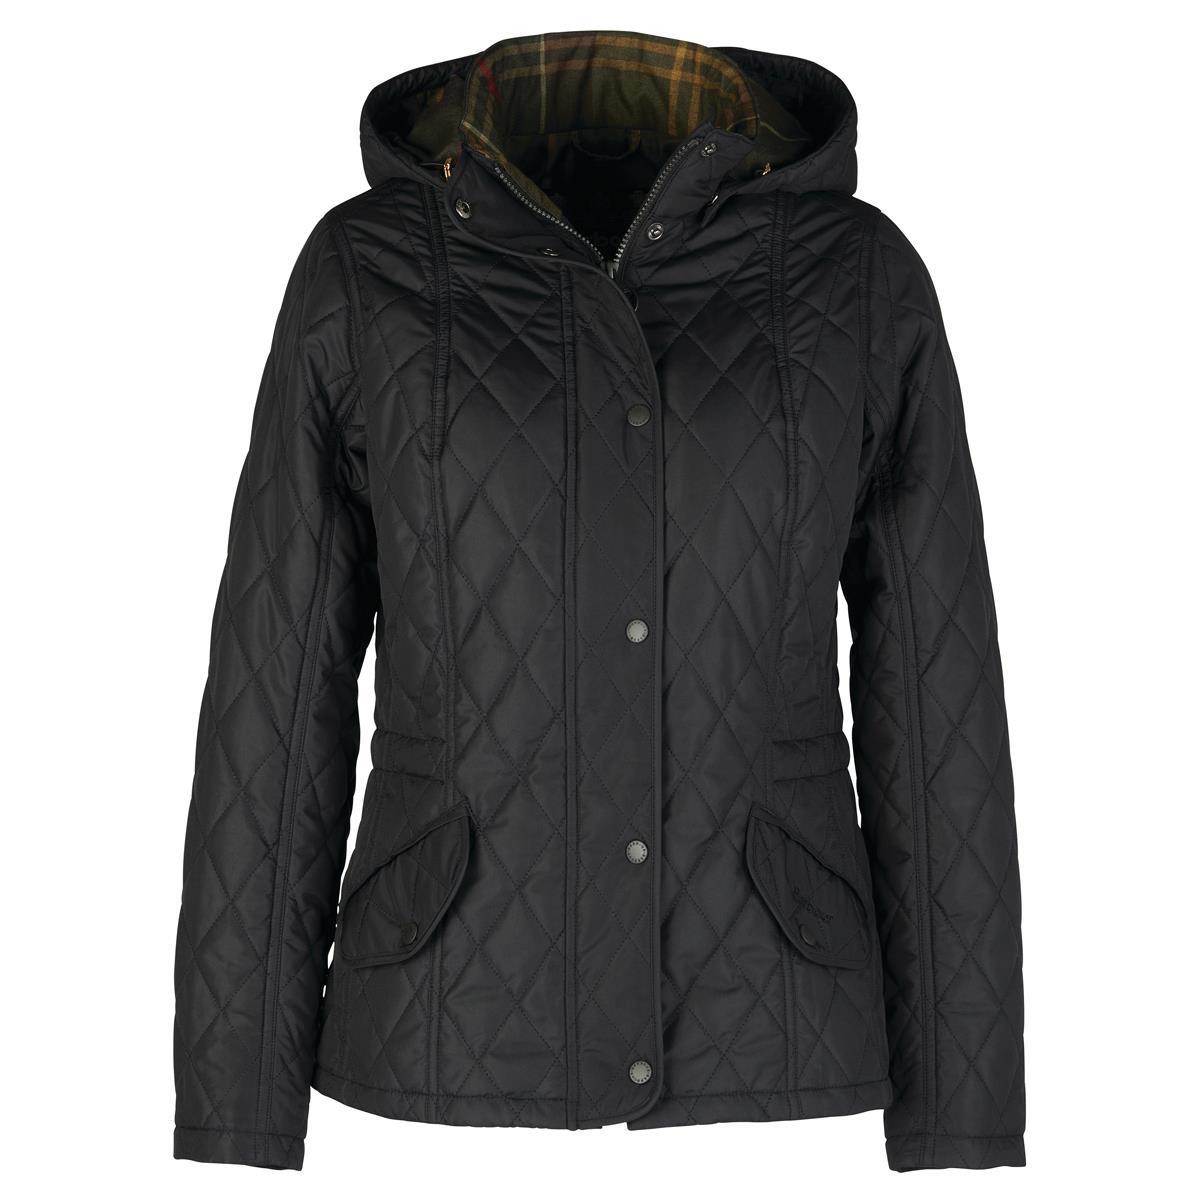 Barbour Womens Millfire Quilt Questions & Answers